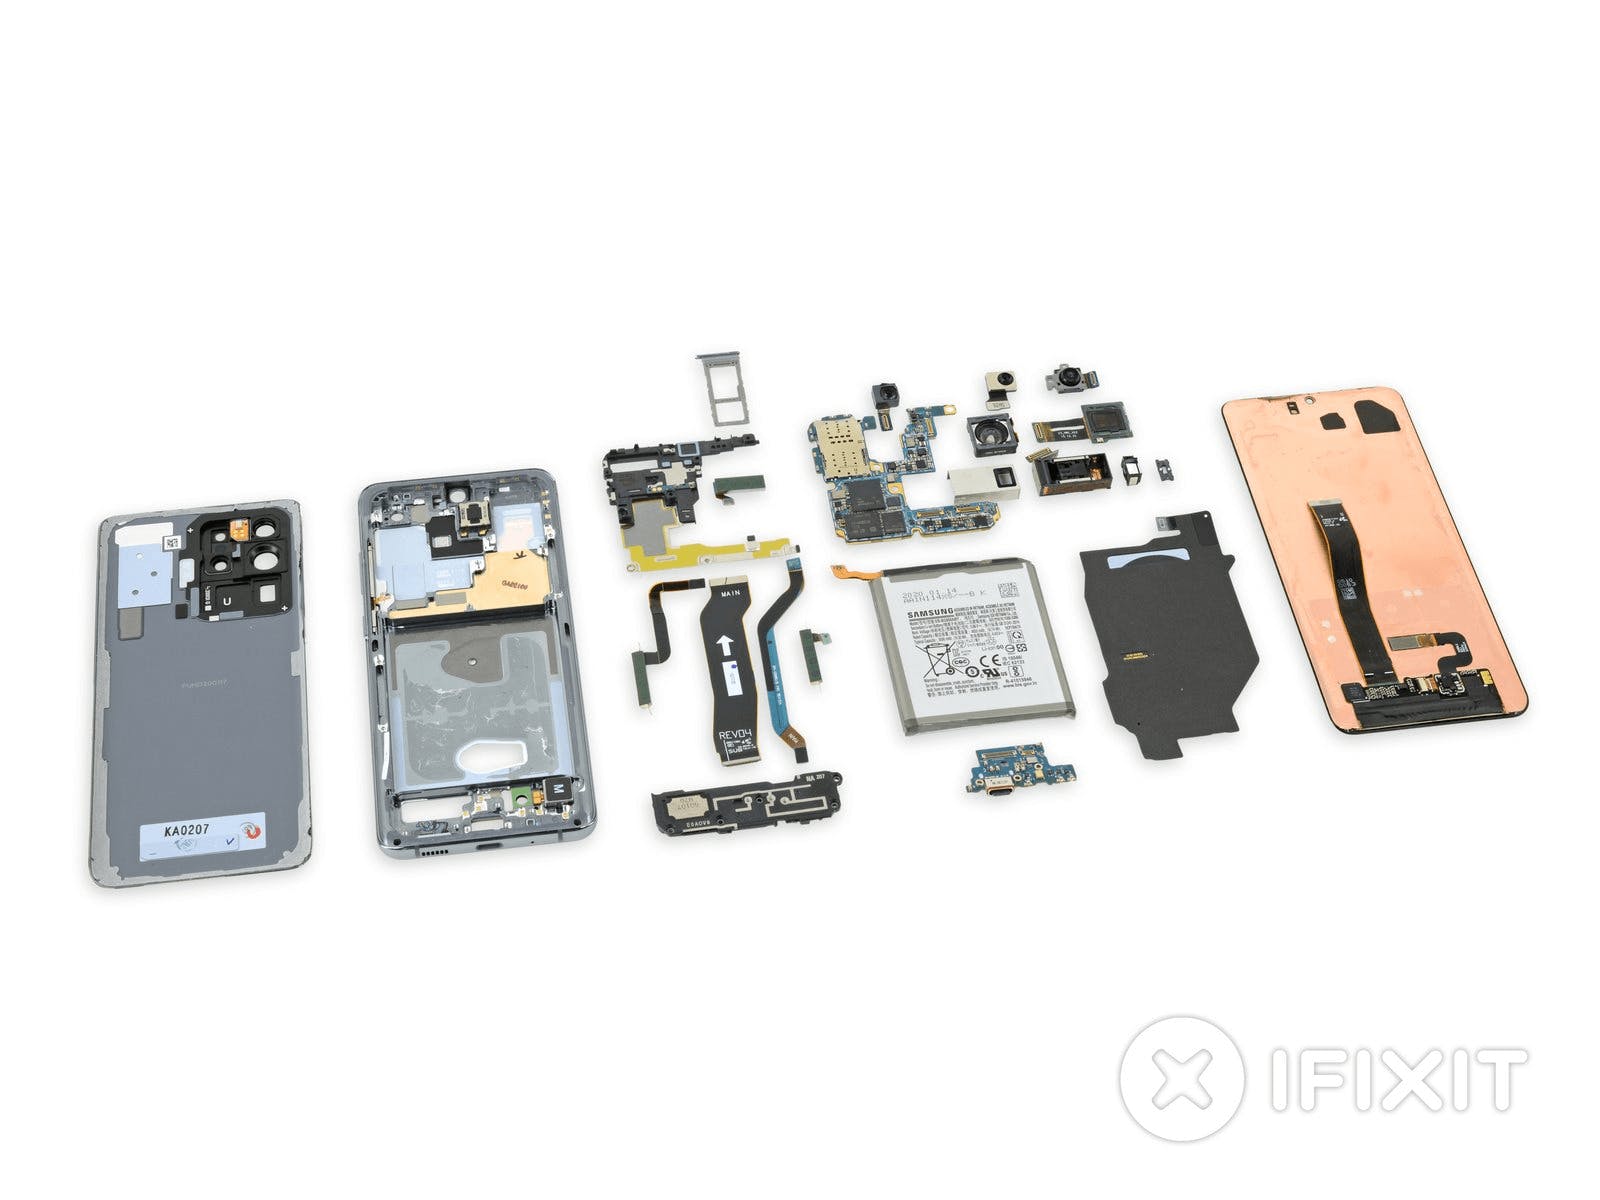 a mobile phone and its components